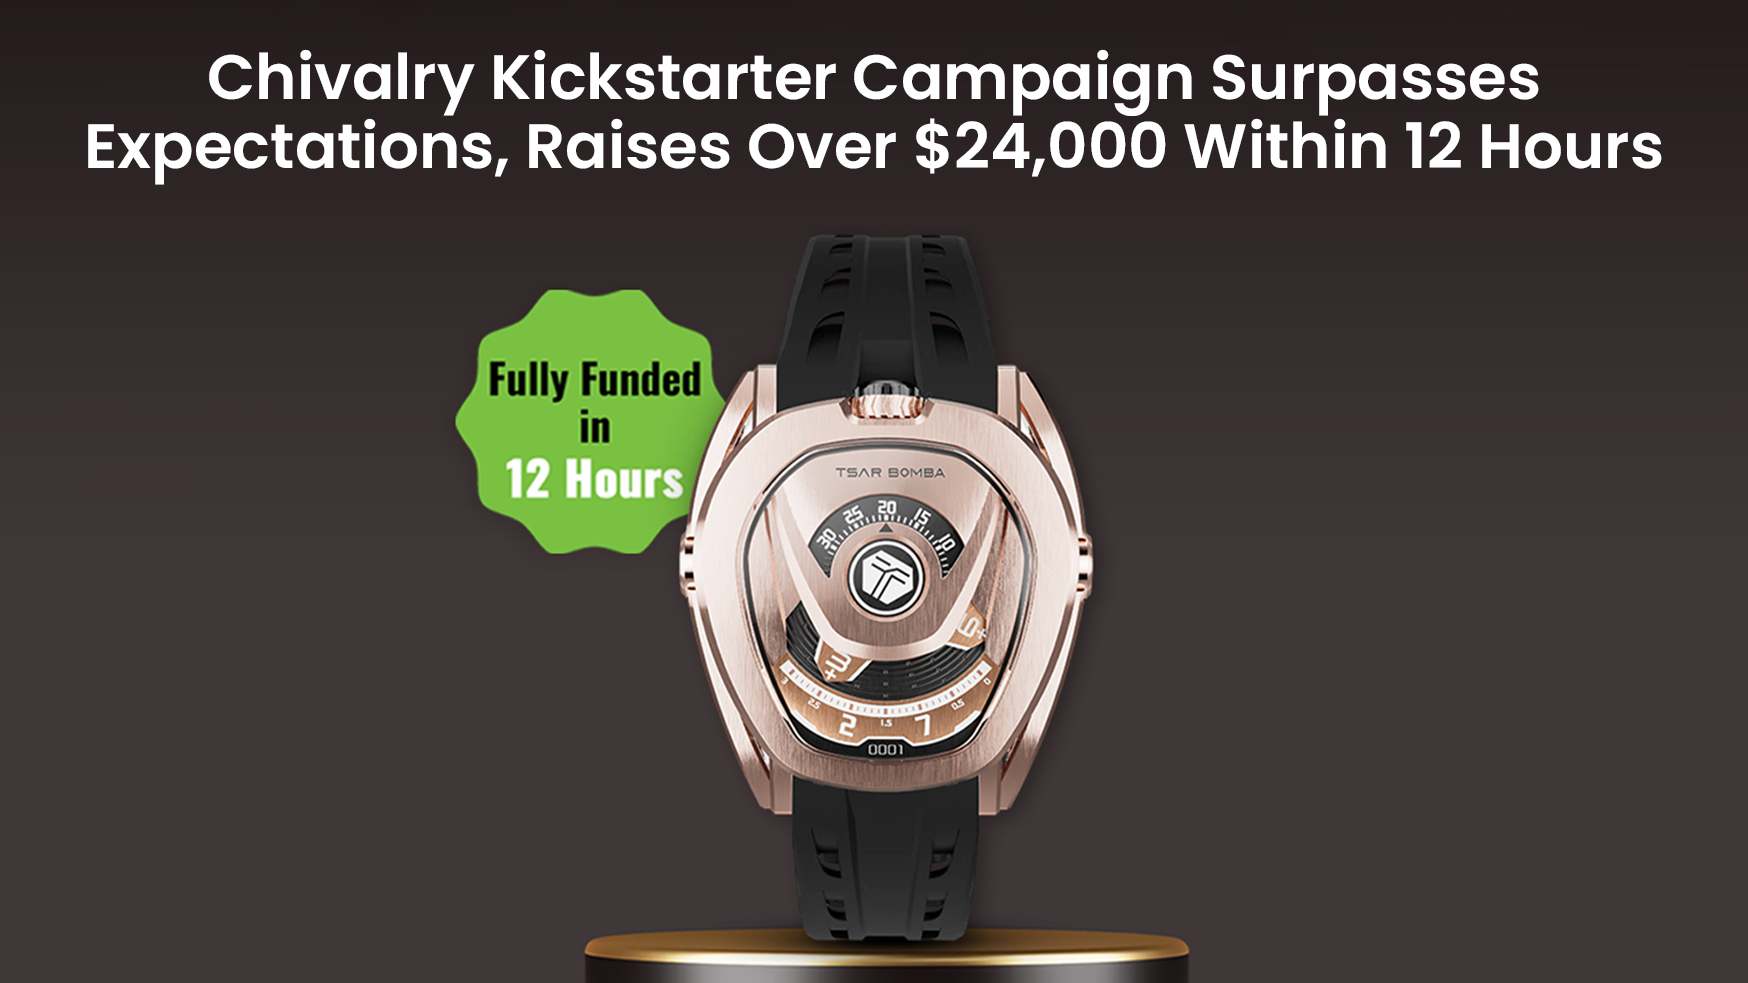 Chivalry Kickstarter Campaign Surpasses Expectations, Raises Over $24,000 Within 12 Hours